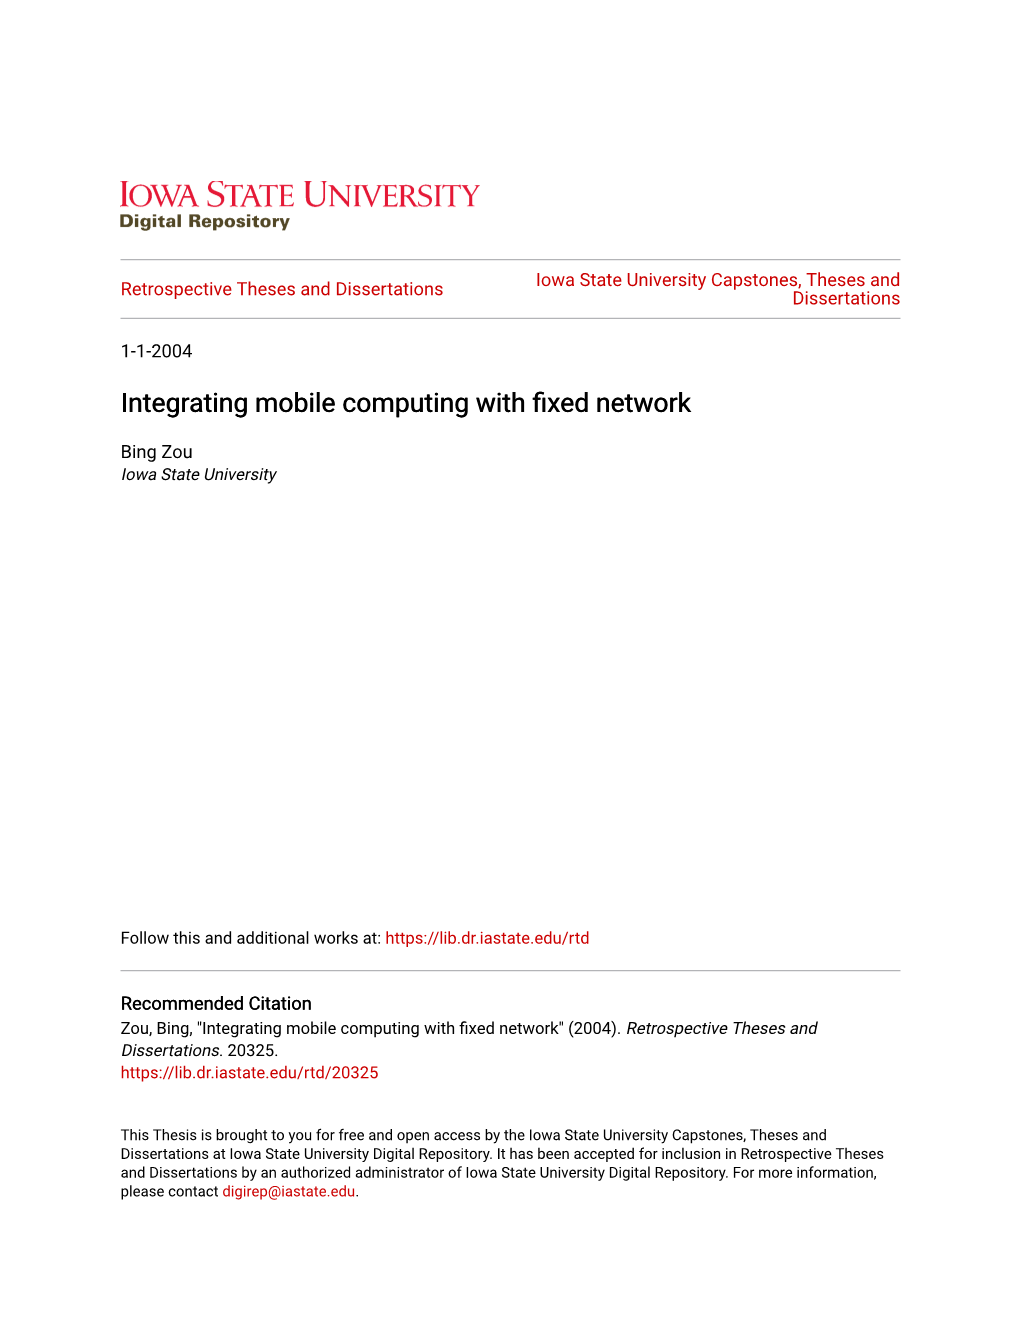 Integrating Mobile Computing with Fixed Network